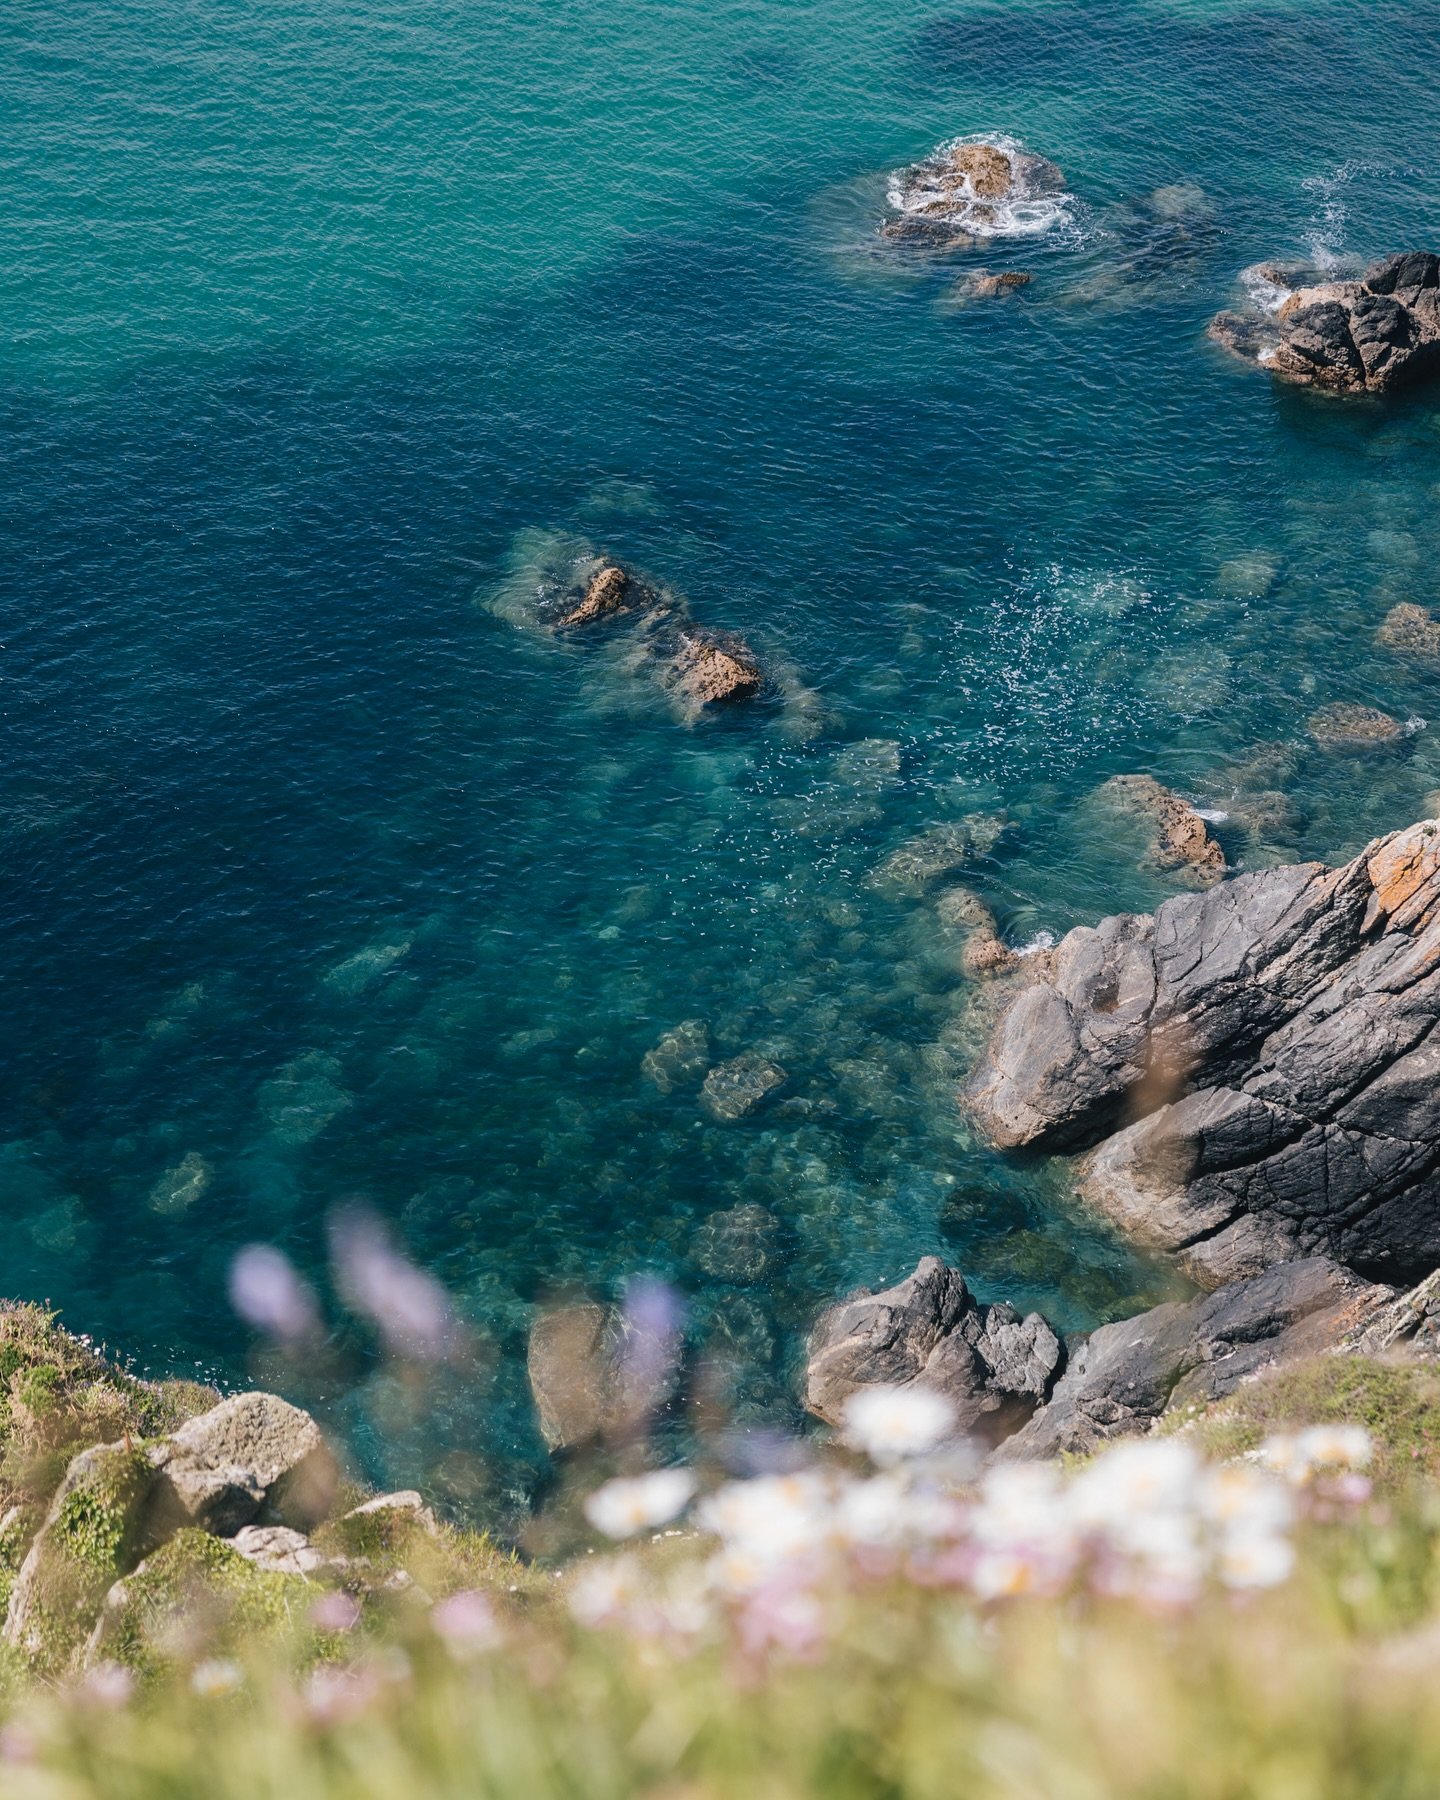 Cornish blues 💙🐟🌊🐳

This week we&rsquo;re down in Cornwall working on a new guide for the website 🙌 We&rsquo;ve been exploring some stunning secluded beaches, eating delicious seafood and rambling seacliffs. Looking forward to sharing the guide 